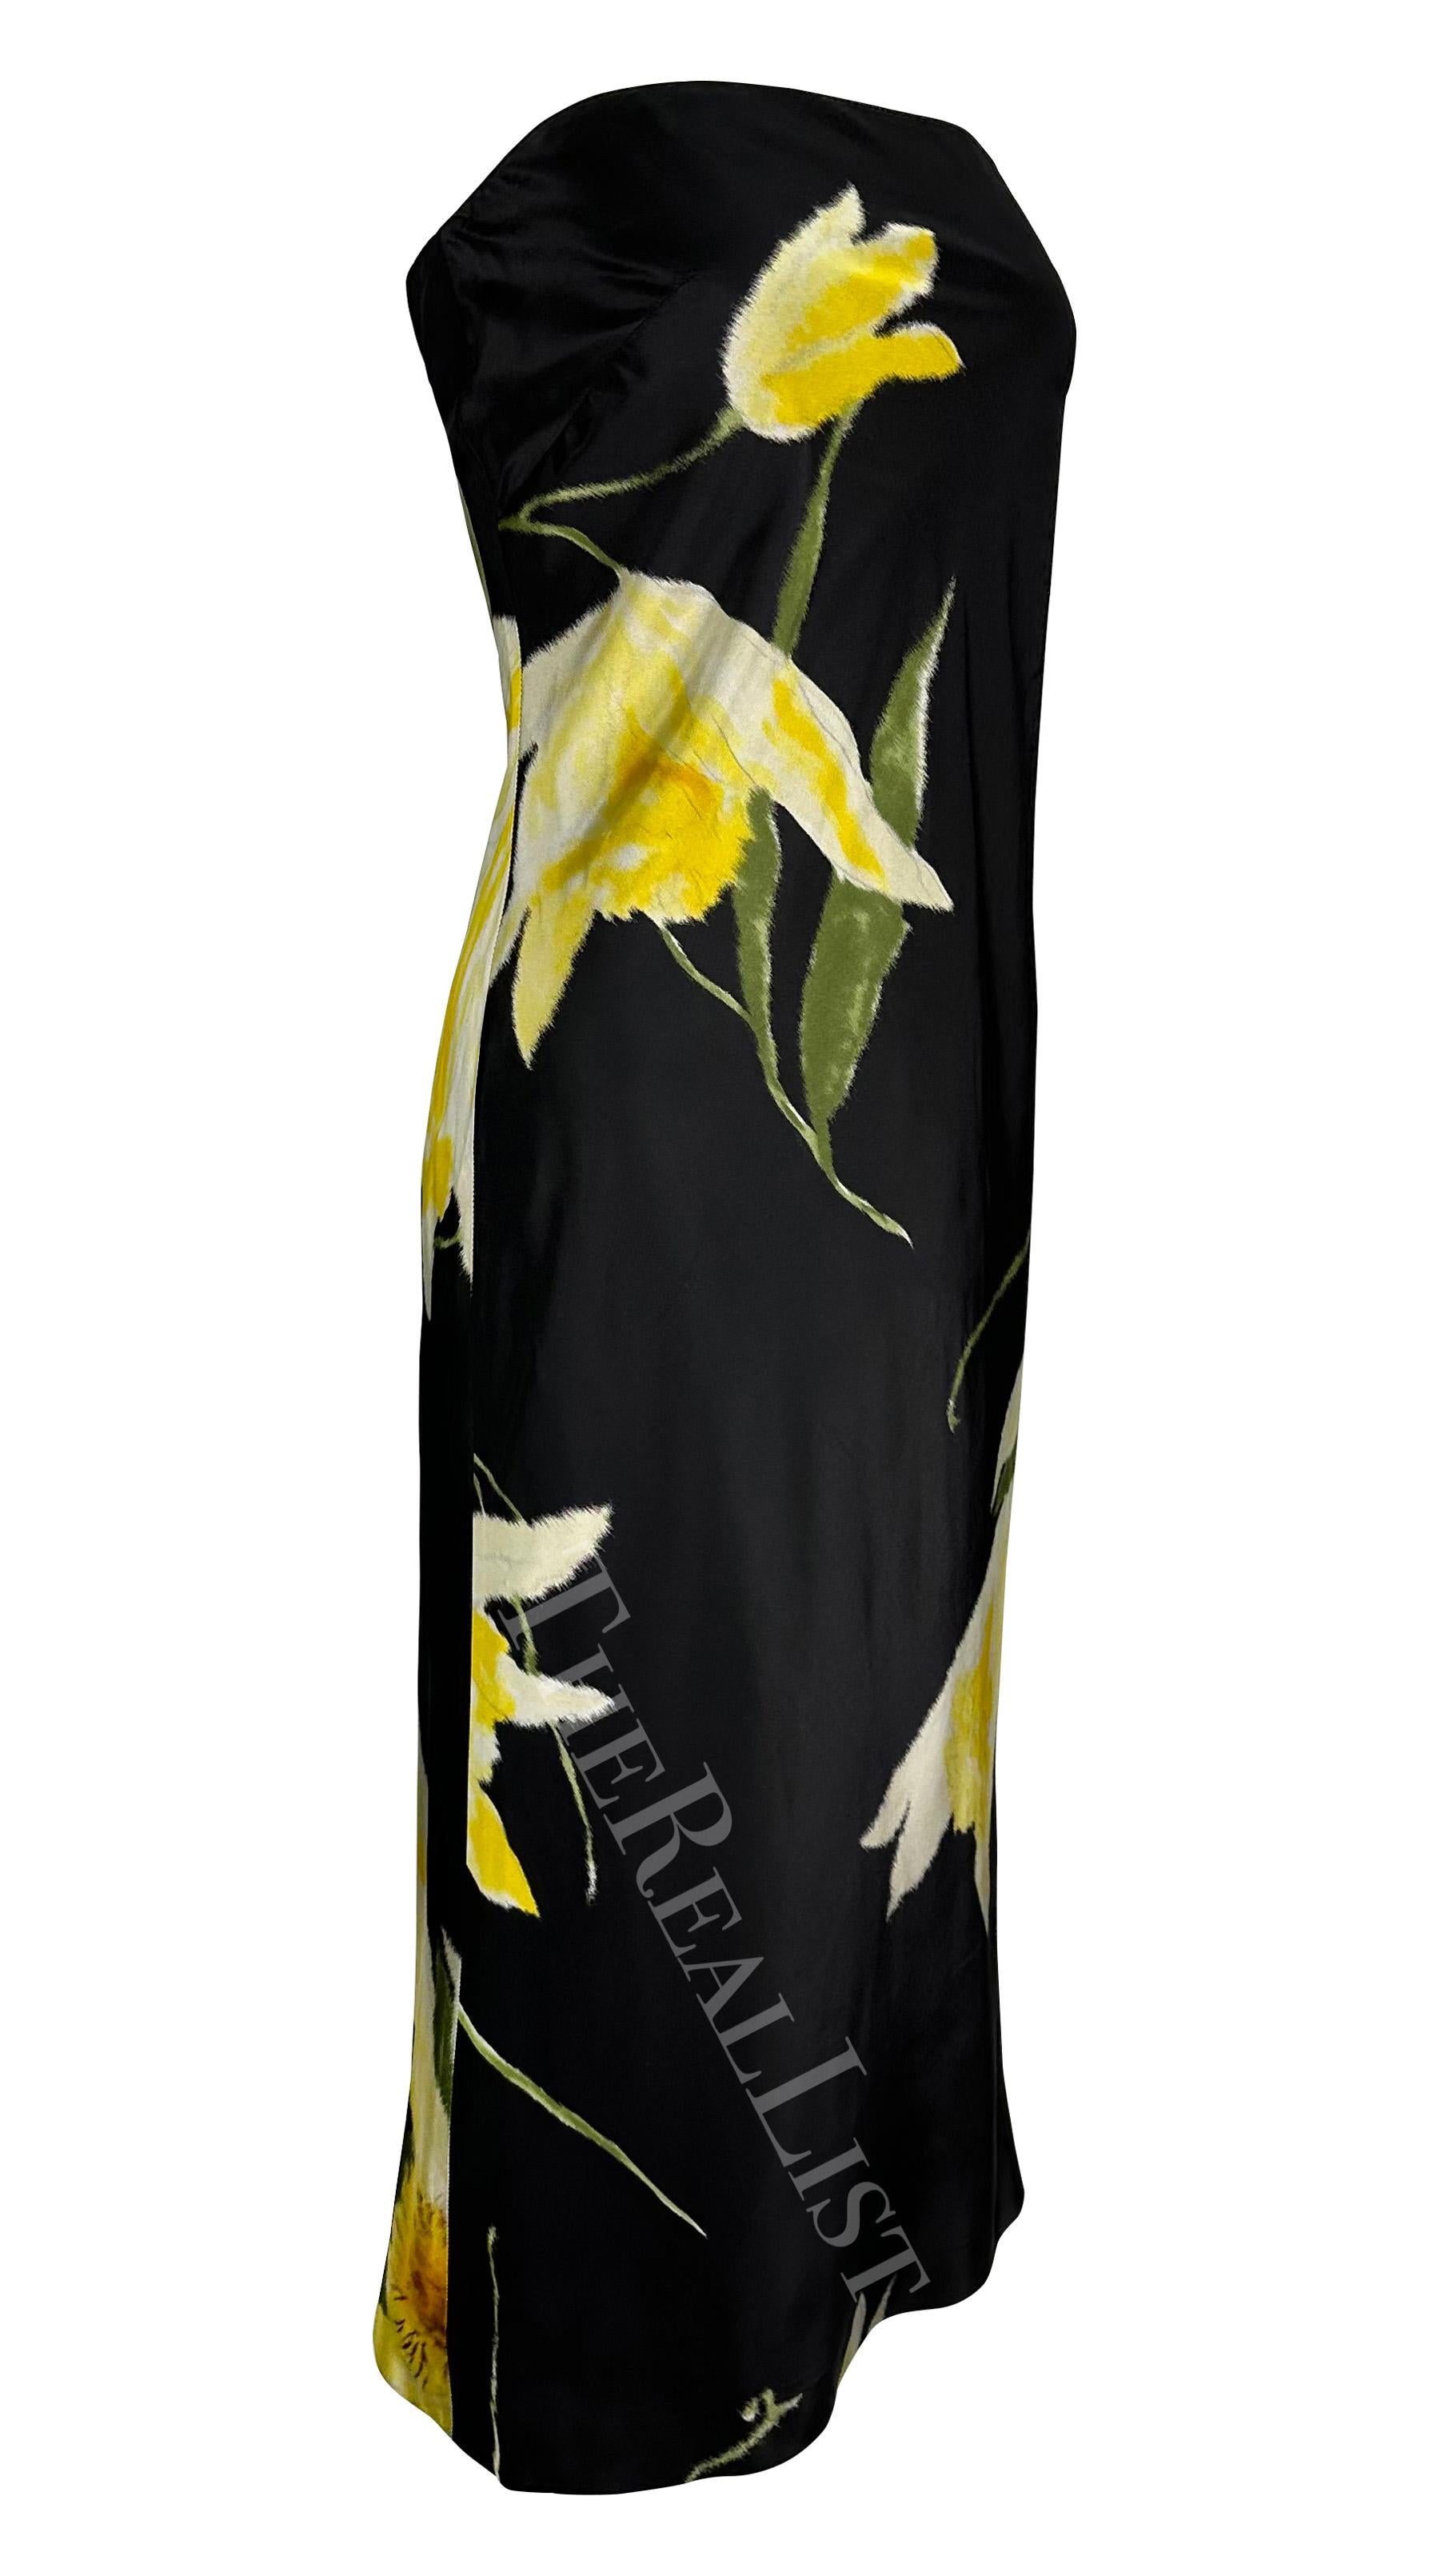 S/S 2000 Ralph Lauren Runway Black Yellow Floral Strapless Cocktail Dress For Sale 6